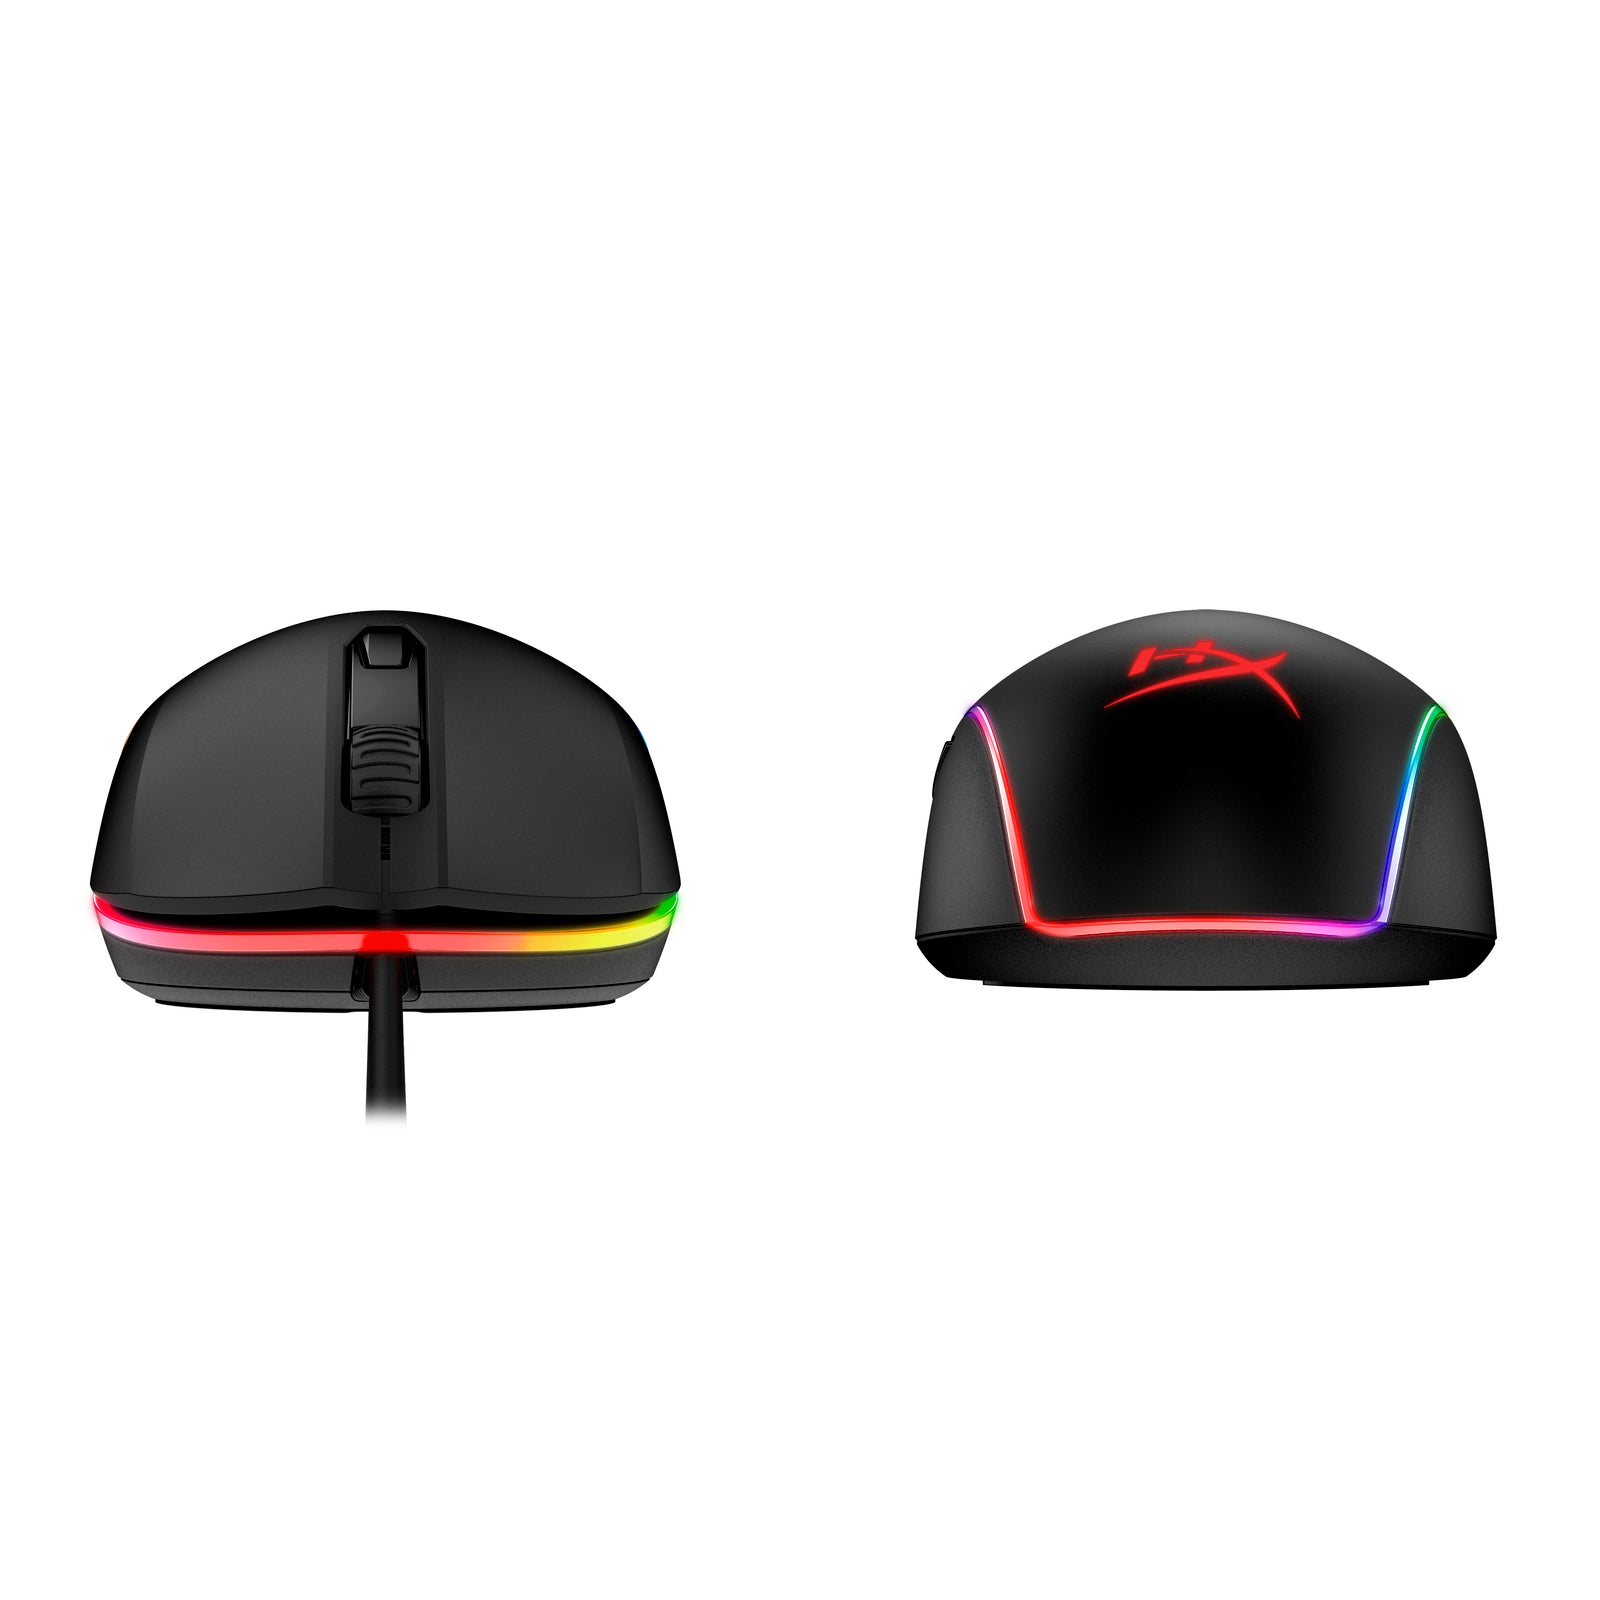 HyperX Pulsefire Surge - Gaming Mouse